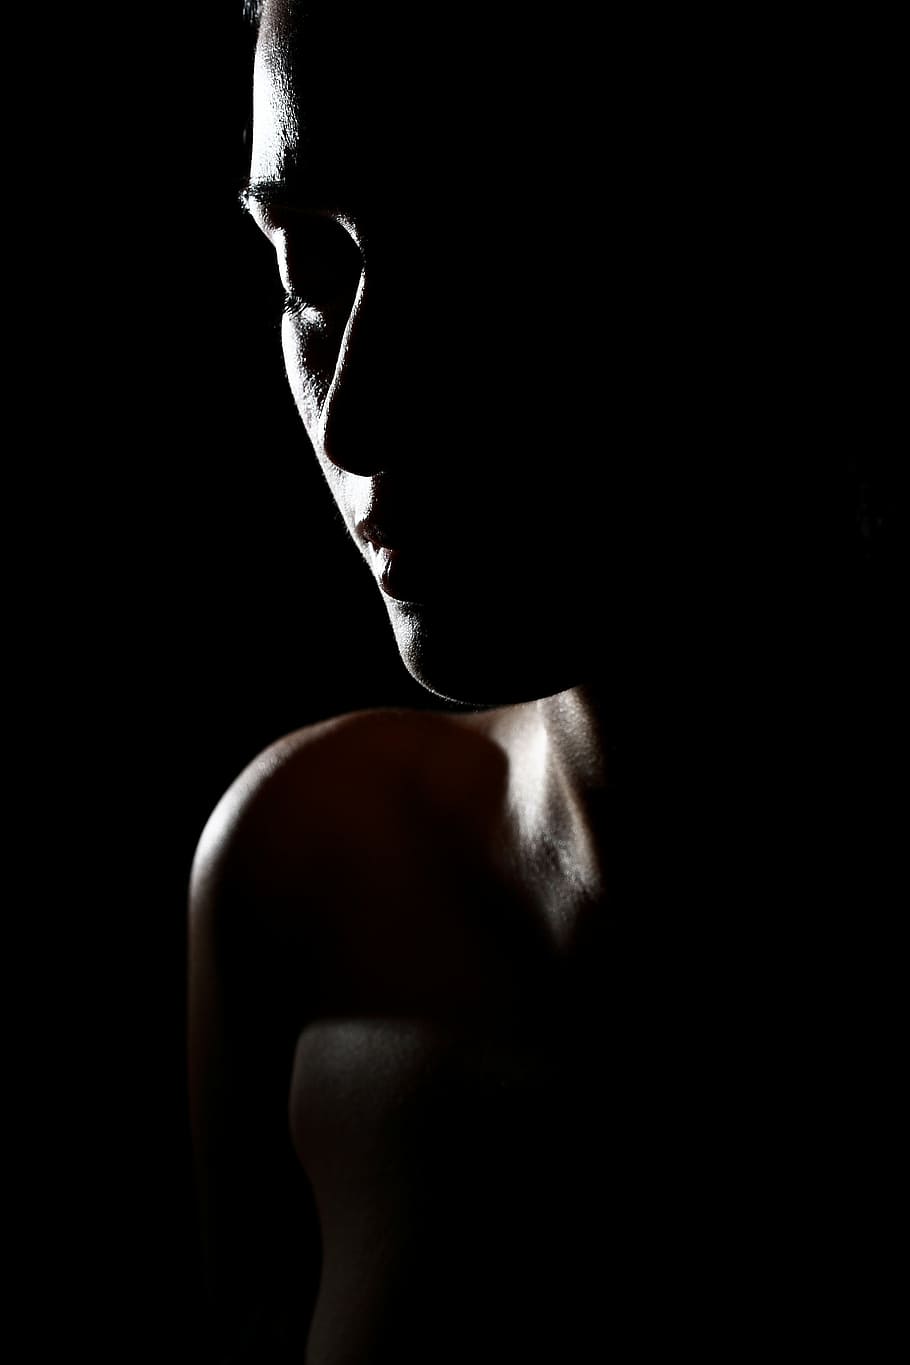 model, light, lip, beauty, innocence, silhouette, the innocence, young model, photography, loneliness